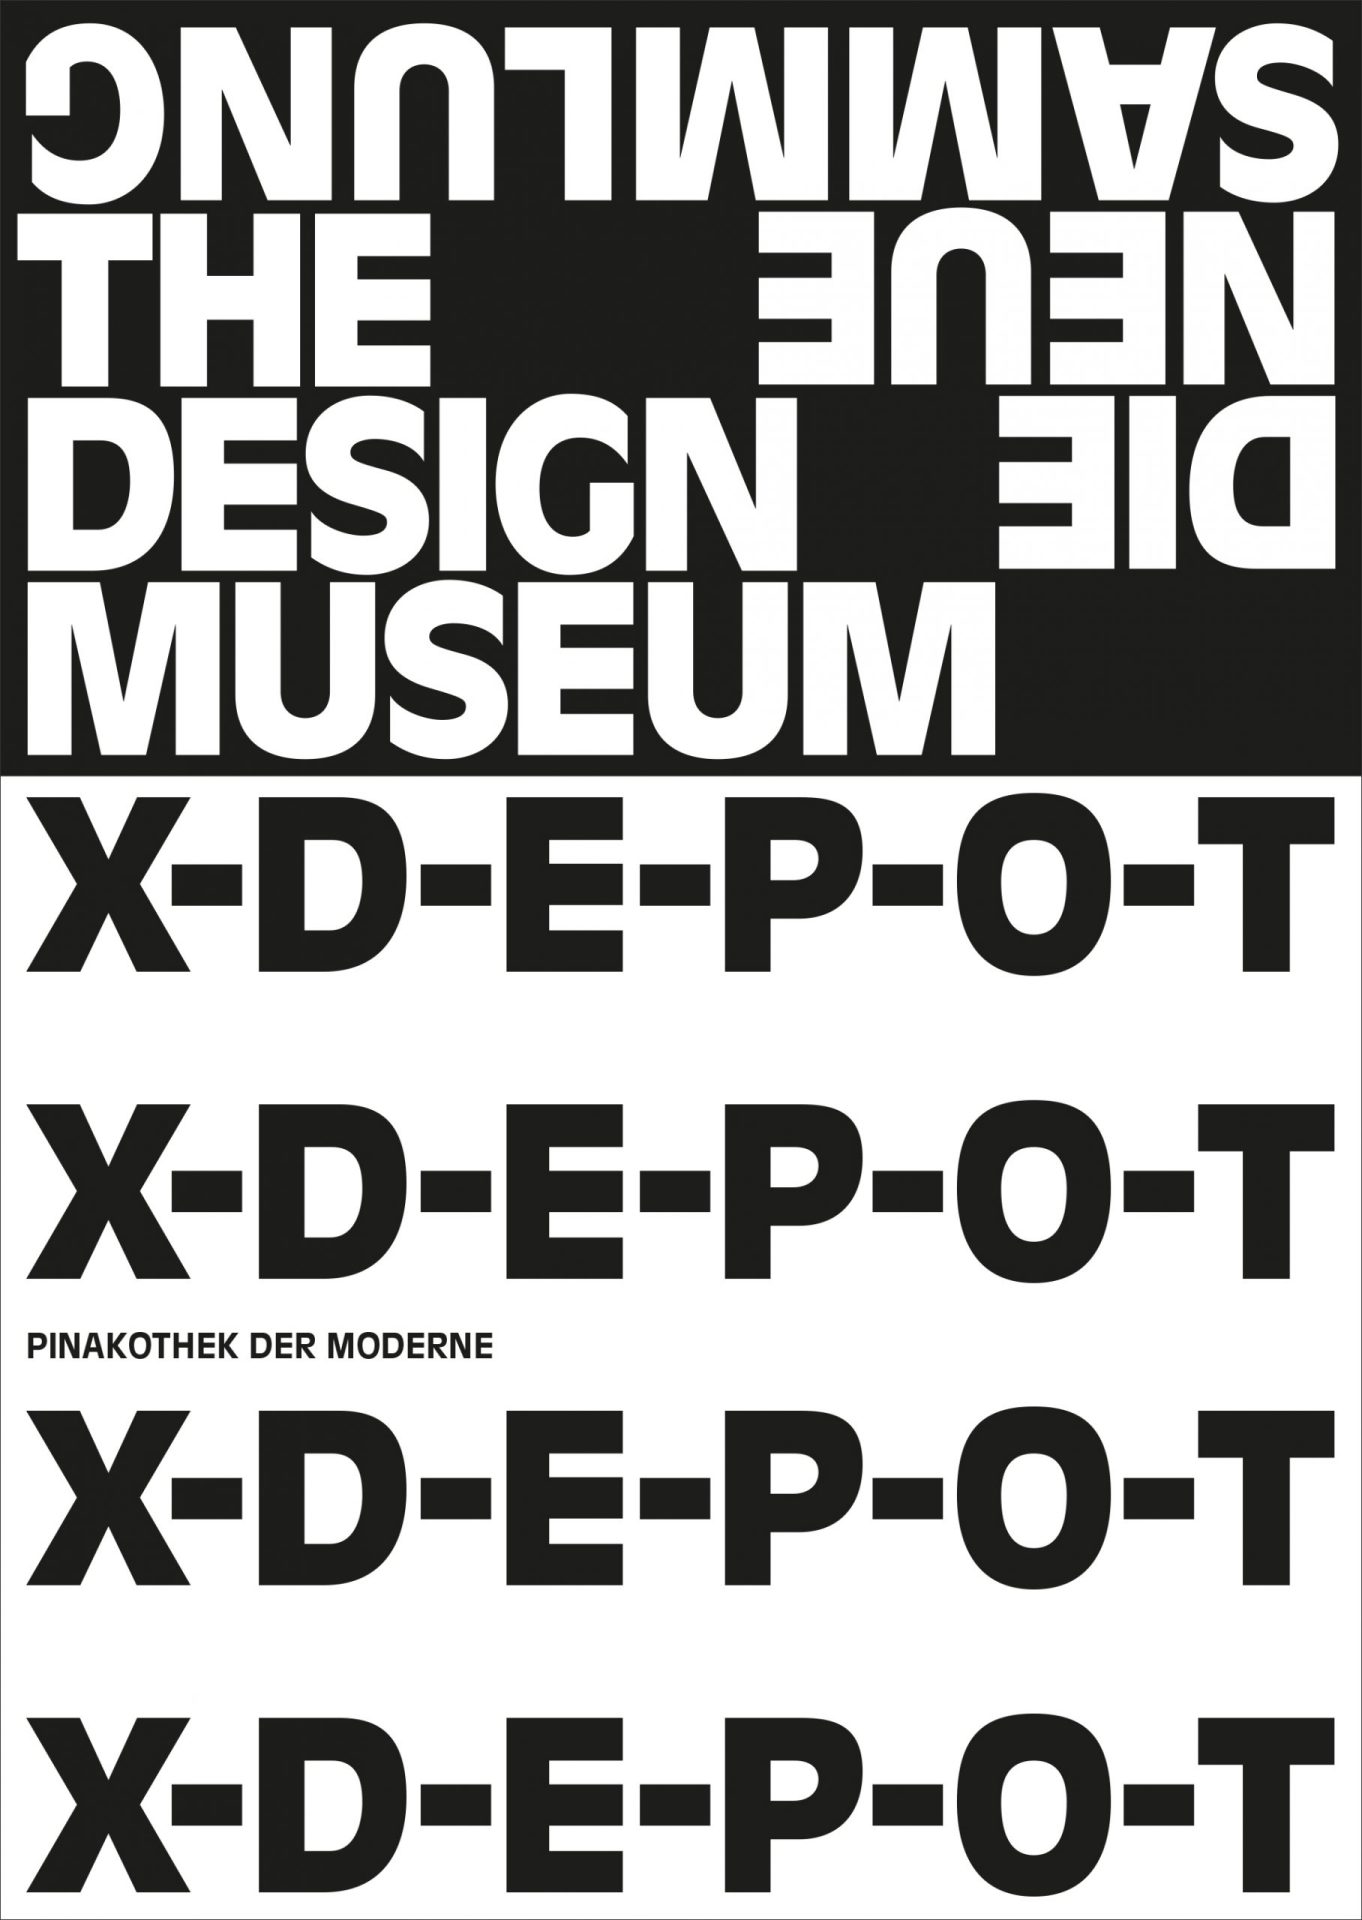 The X-D-E-P-O-T exhibition poster is on display. It is divided into two parts. The upper part shows the logo of Die Neue Sammlung on a black background with white lettering. In the second, lower part, the exhibition title can be seen four times one above the other on a white background in black capitals.